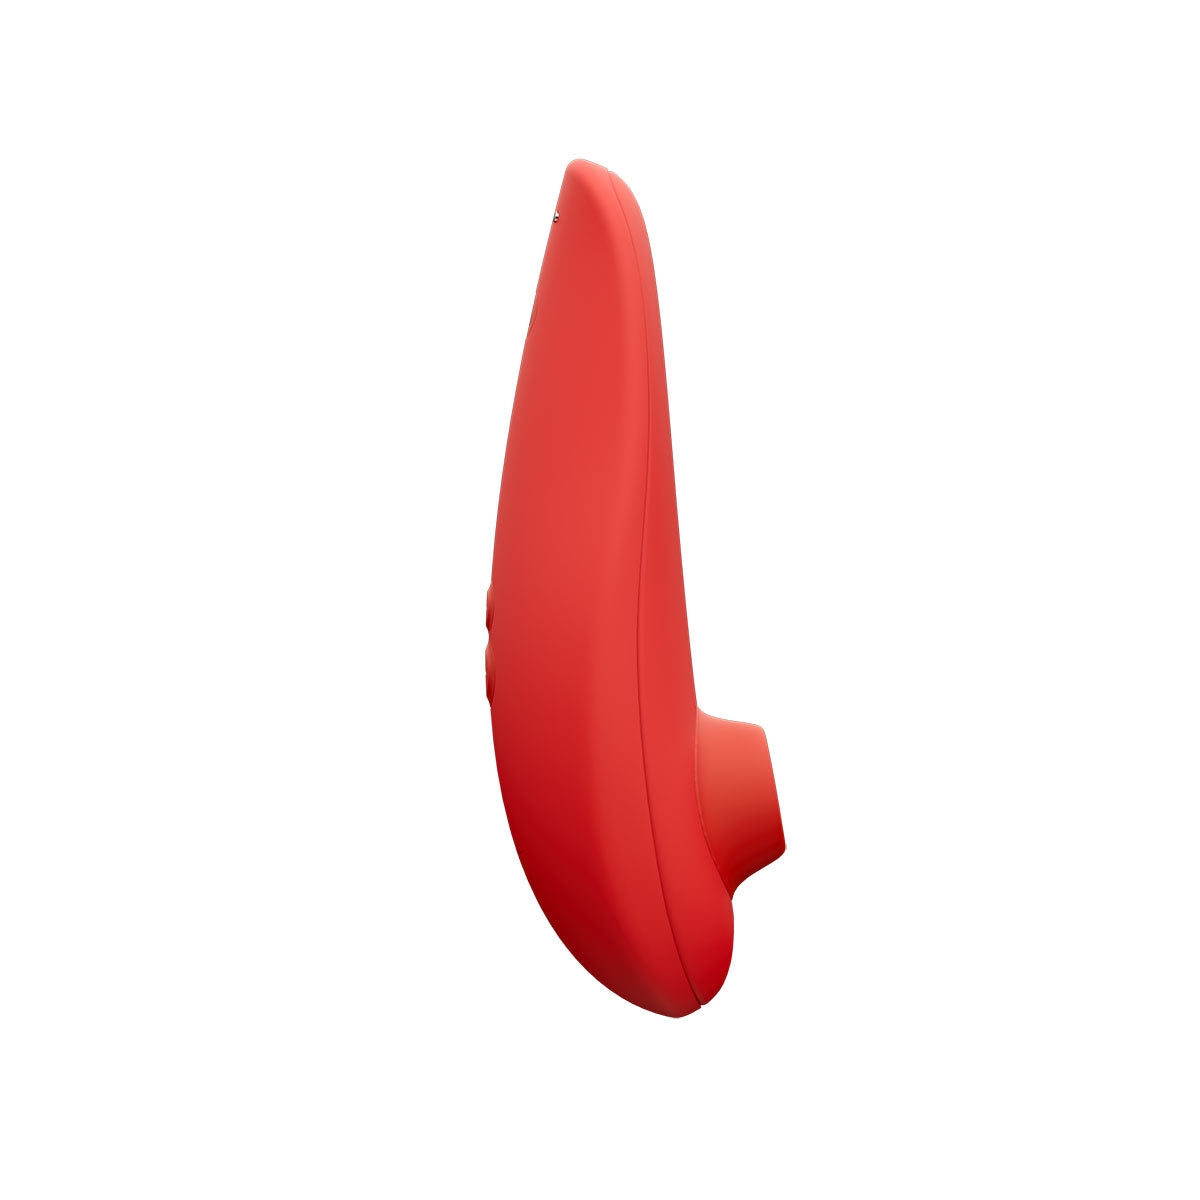 Womanizer Intimacy Devices Womanizer Classic 2 Marilyn Monroe Special Edition - Vivid Red